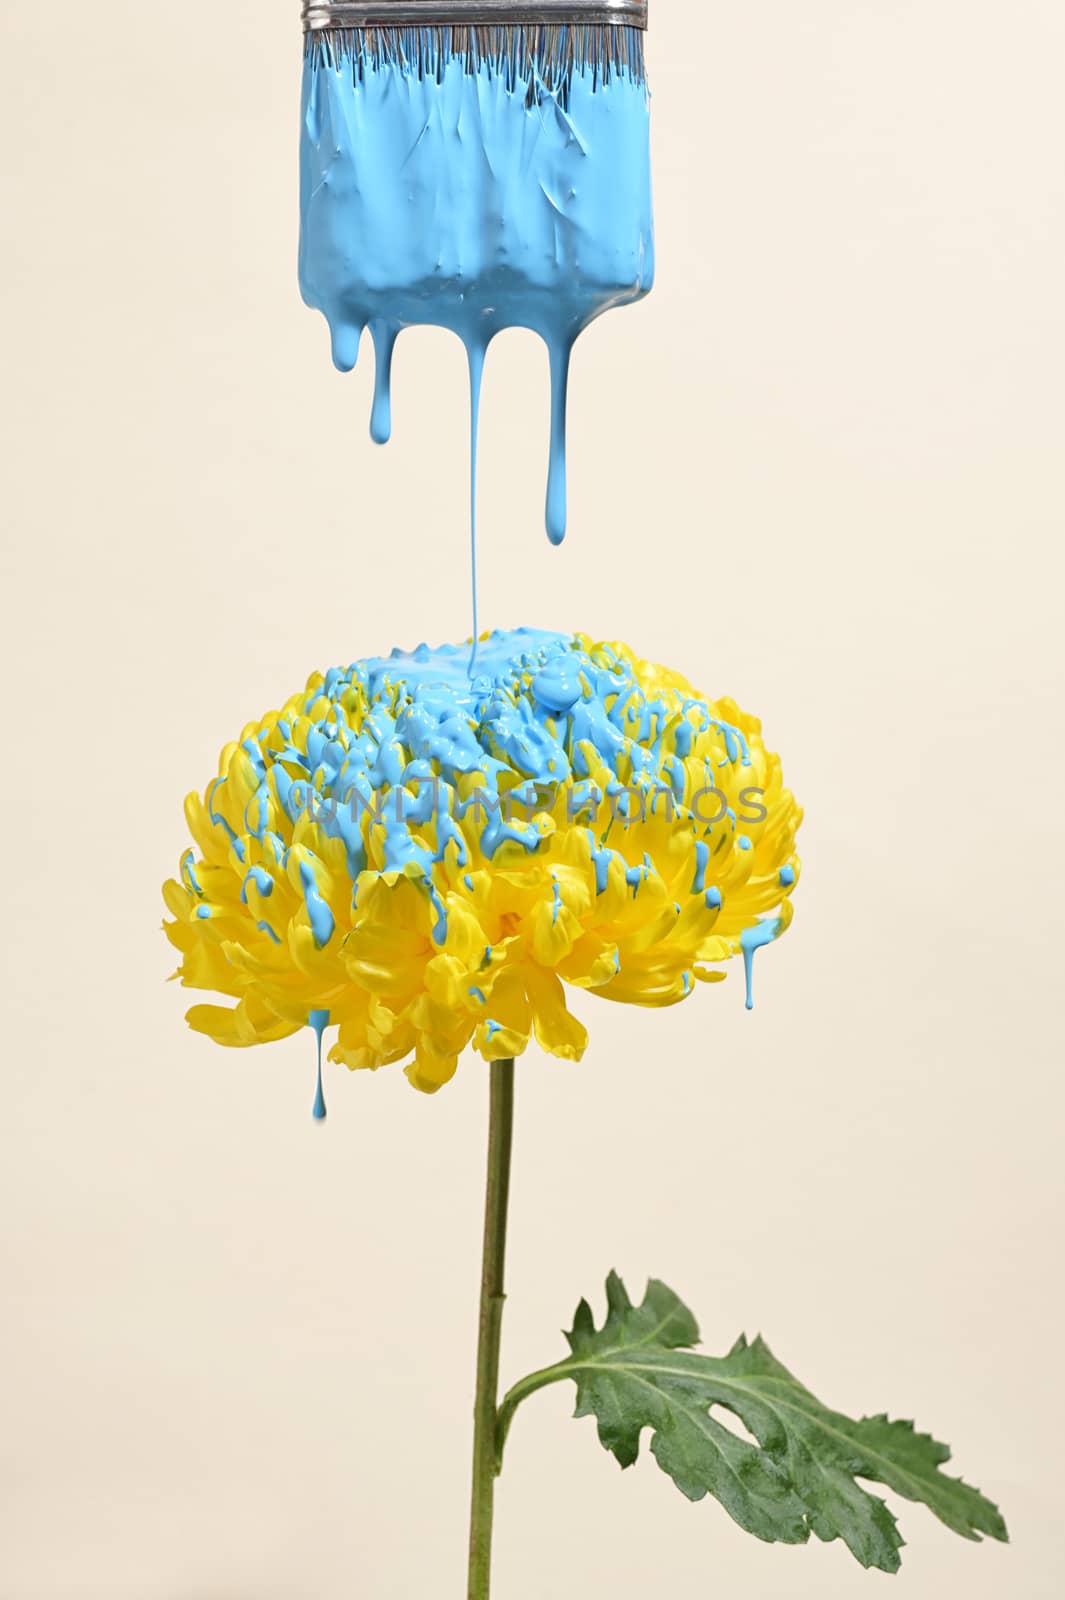 Yellow Chrysanthemum With Drops Of Blue Paint  by jordachelr